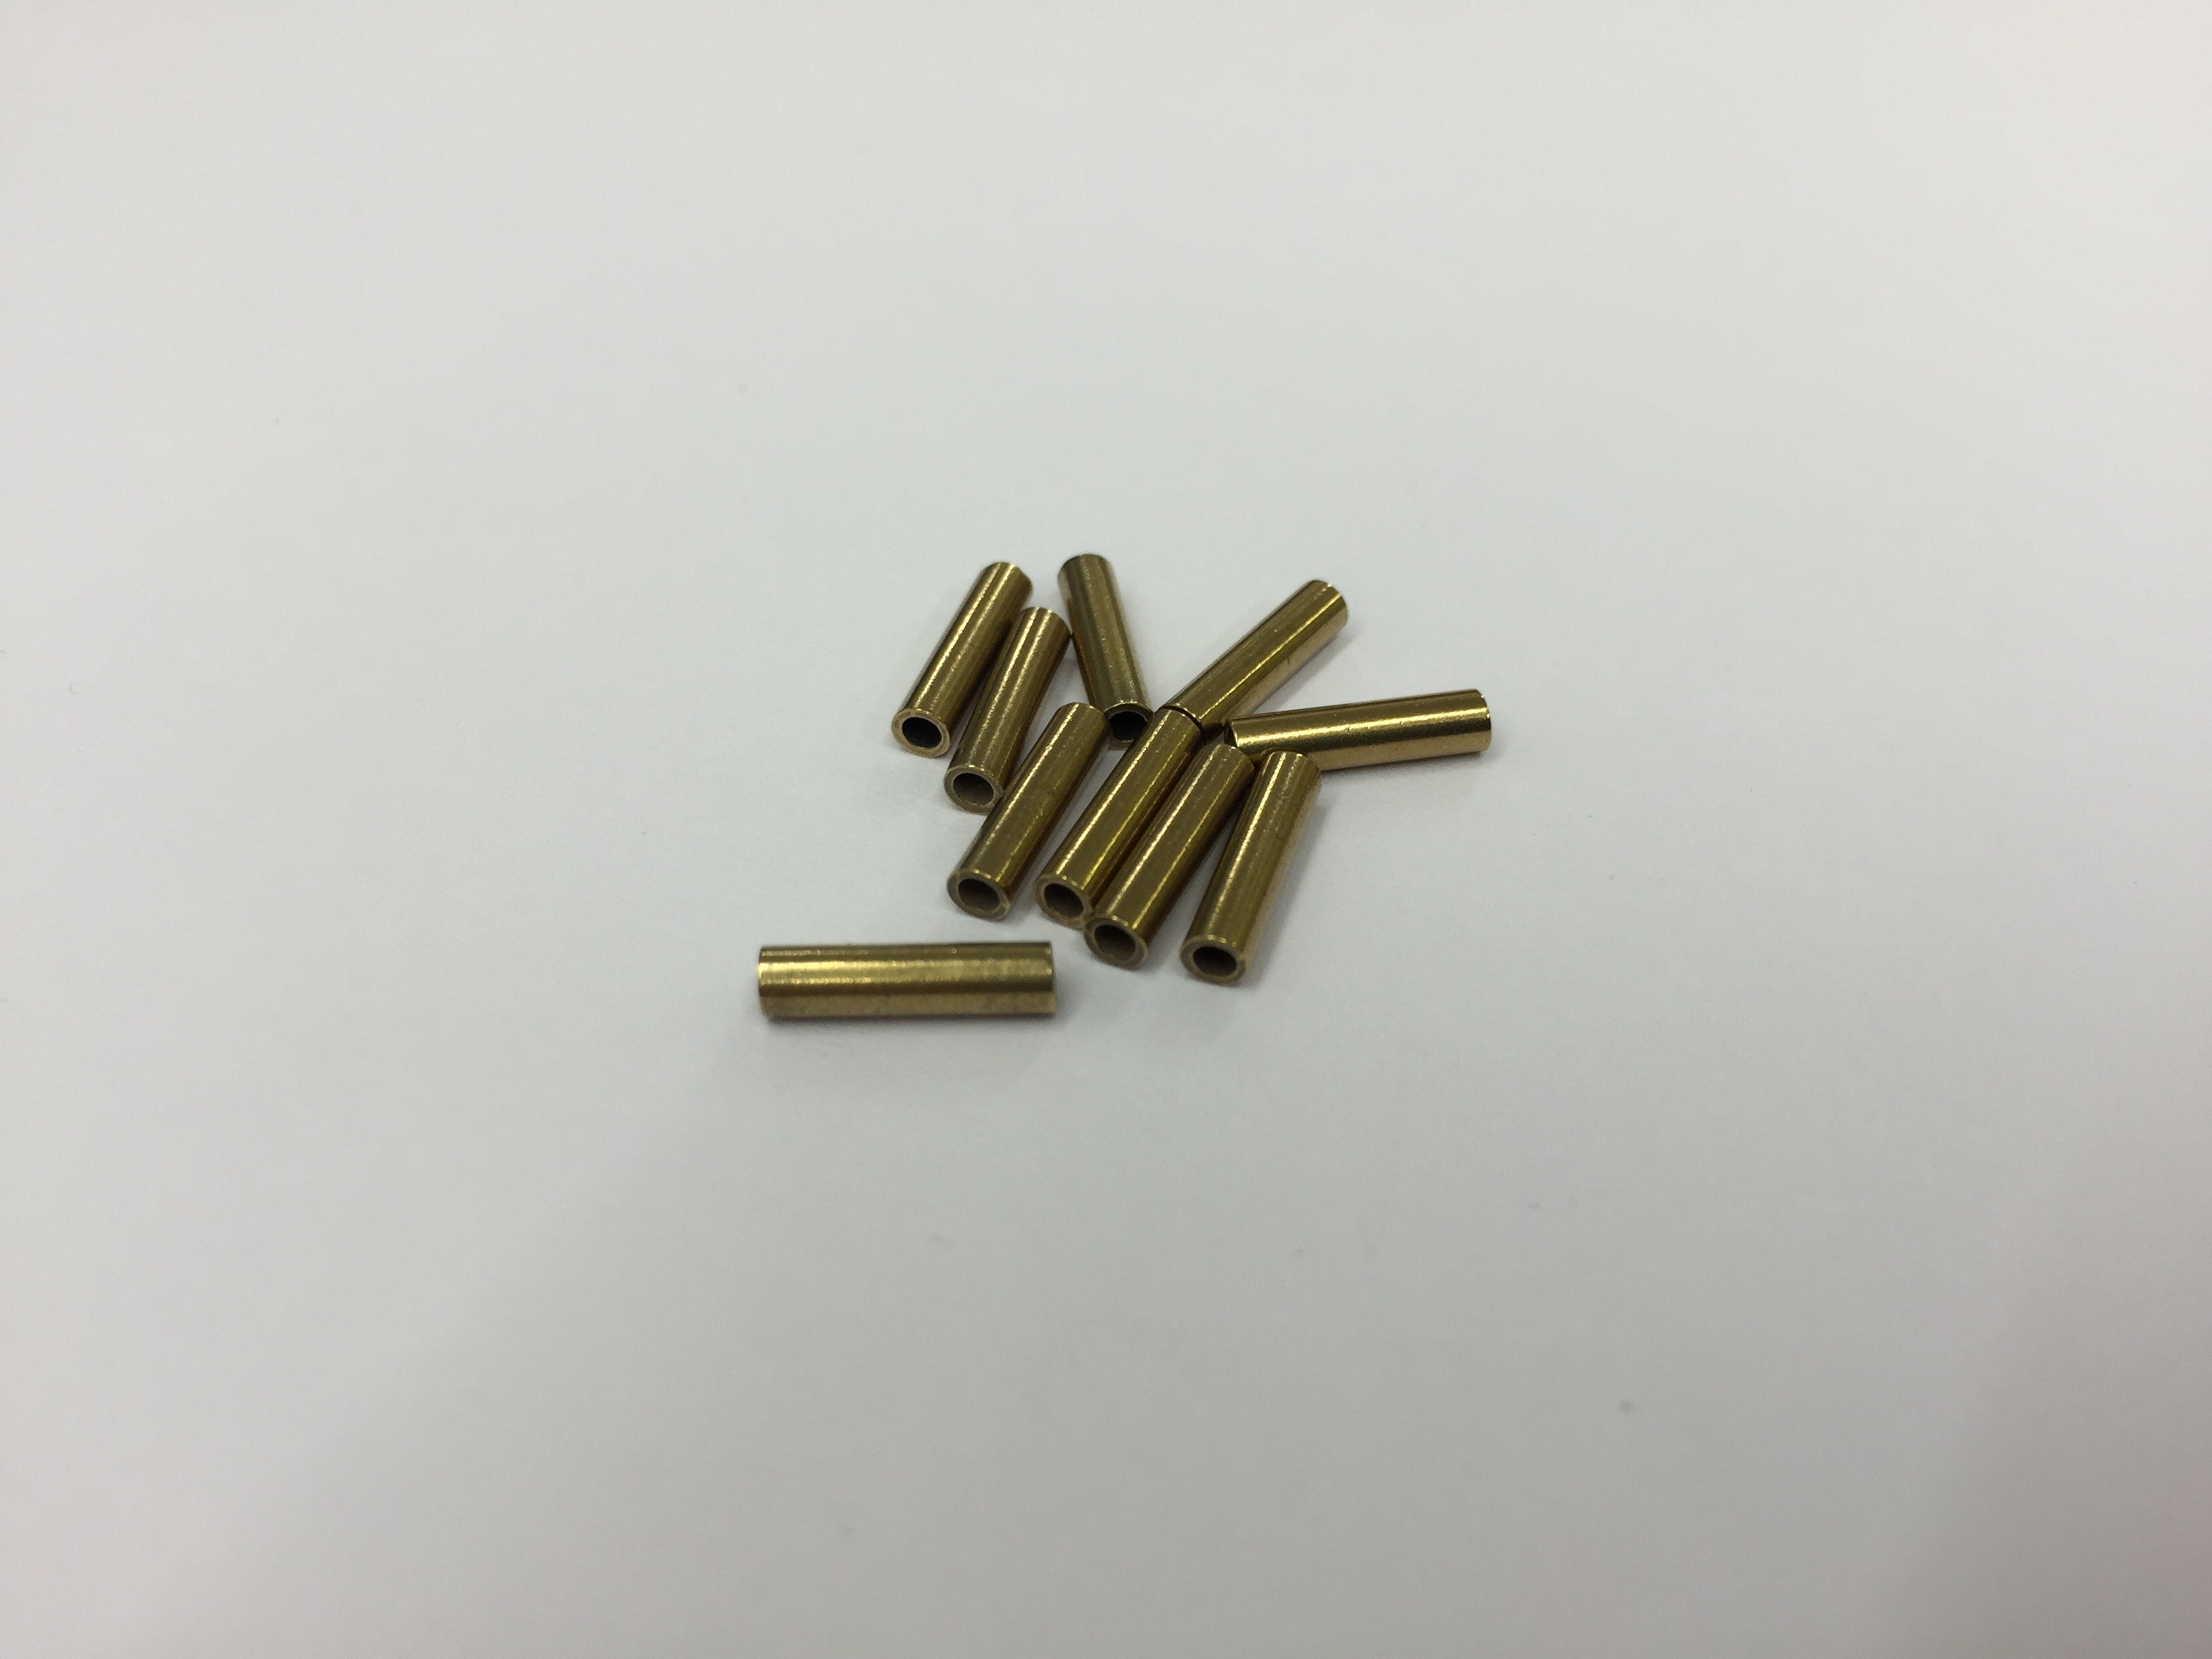 Crimping Ferrule for 0.7mm Closed Loop Nylon trace wire - Brass 30 piece Bulk Pack